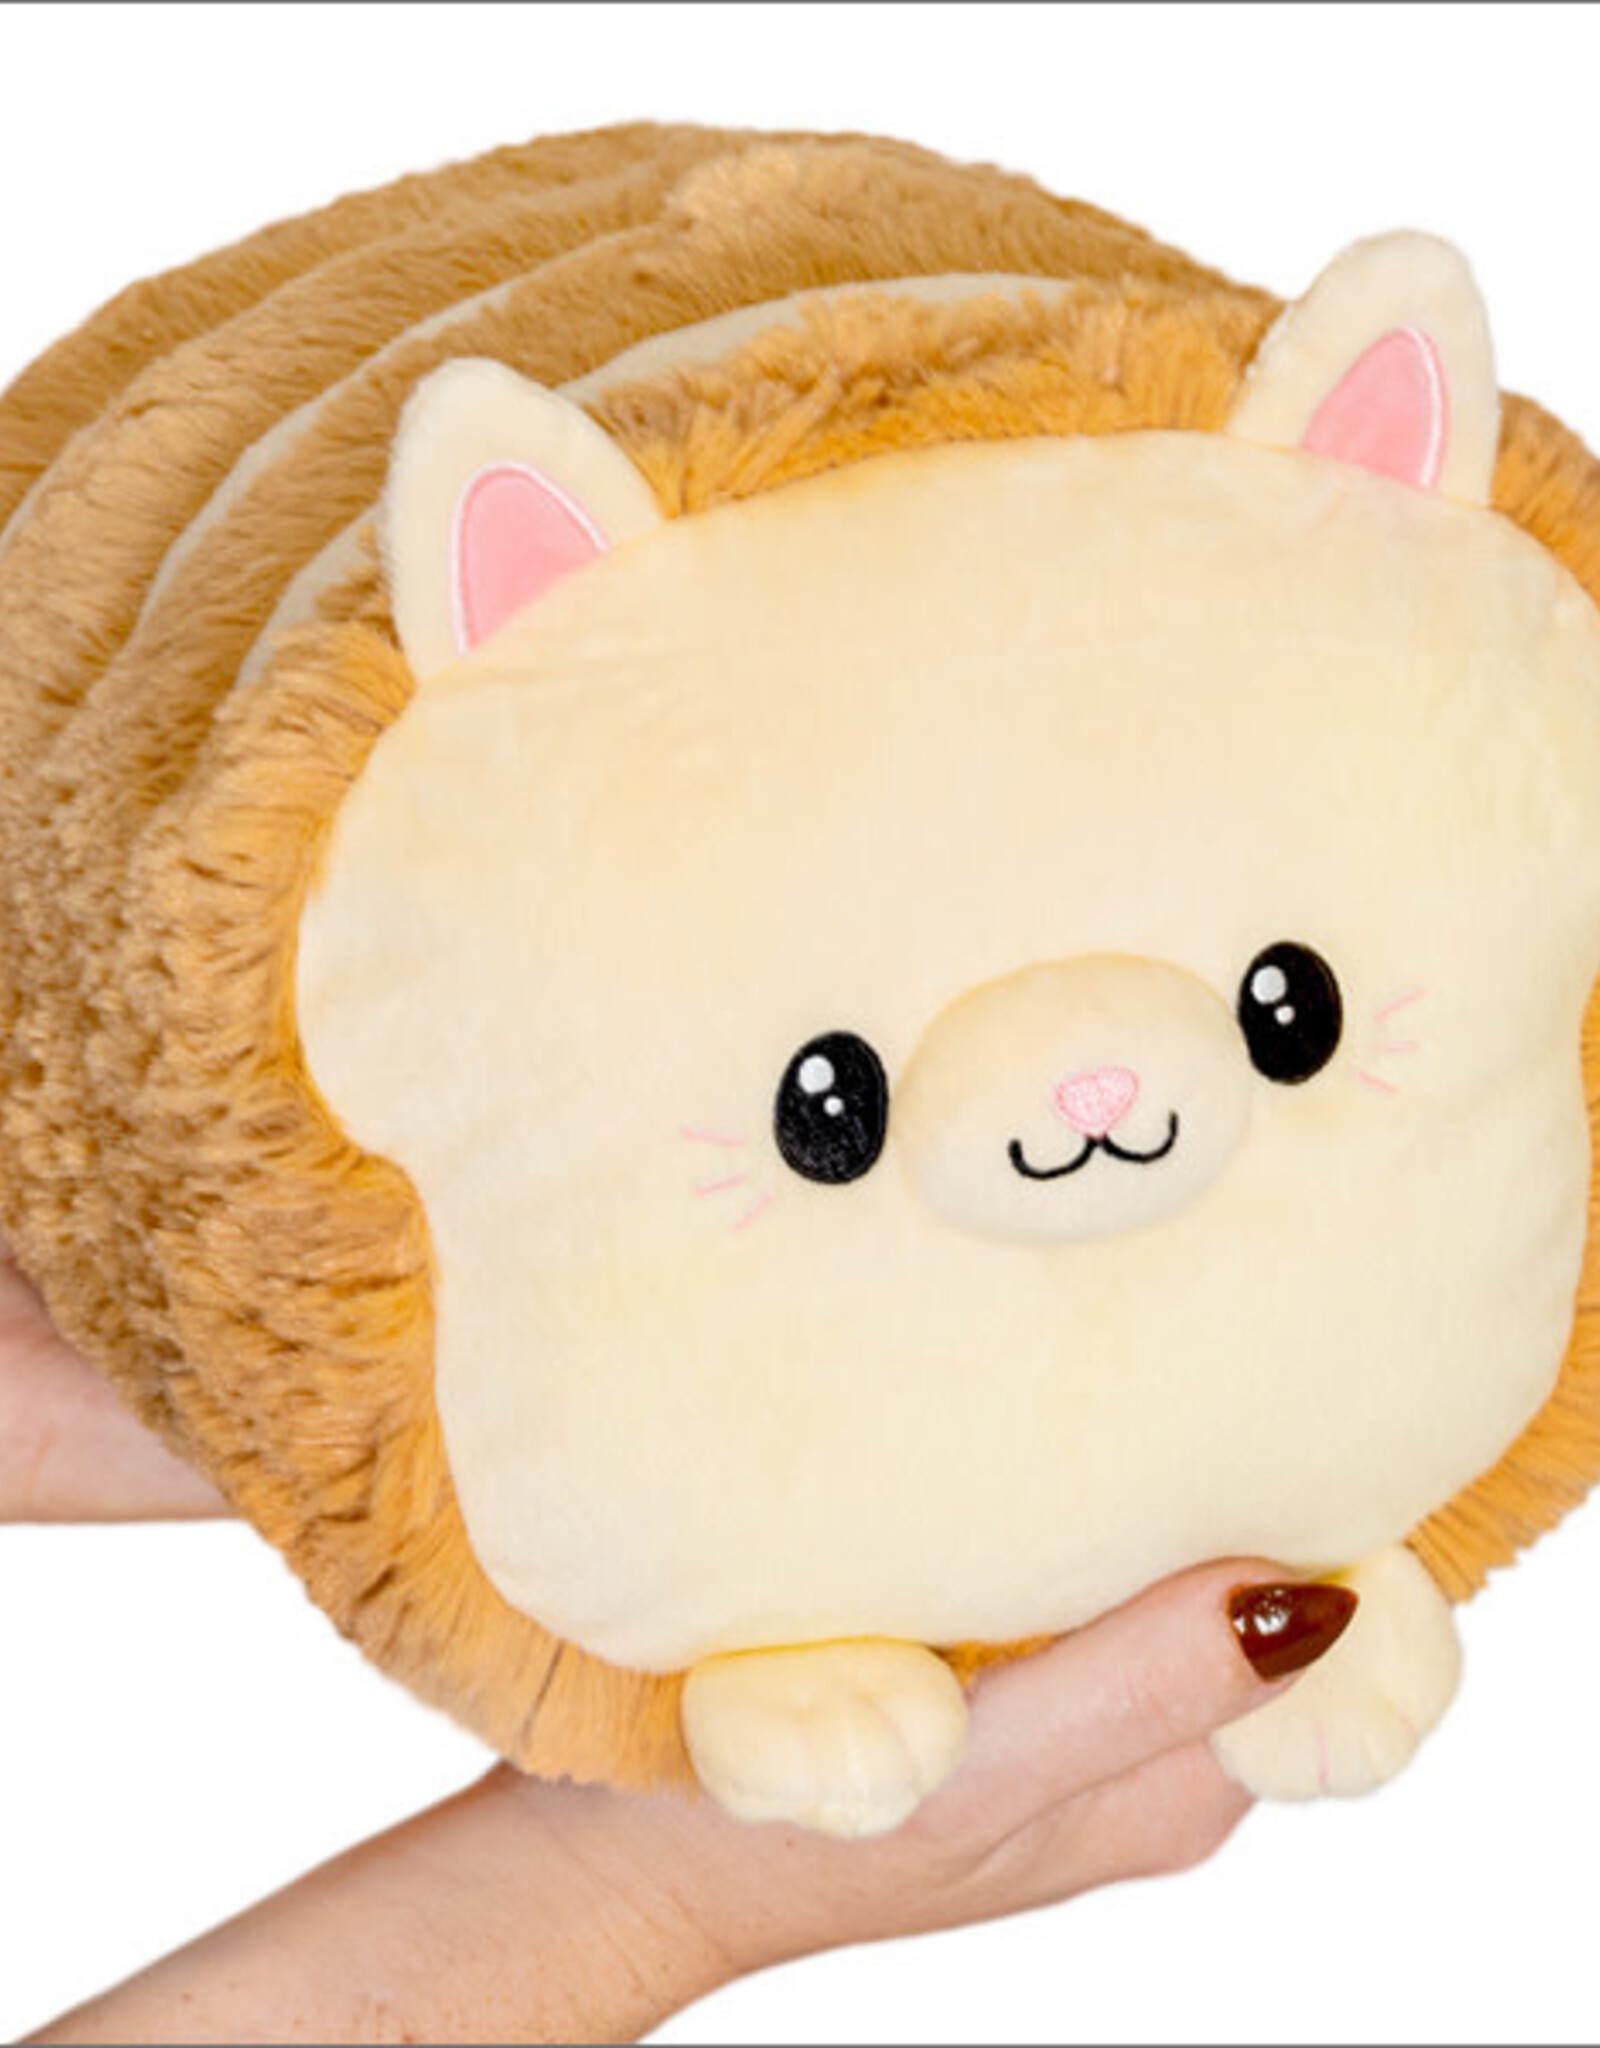 SQUISHABLE CAT LOAF